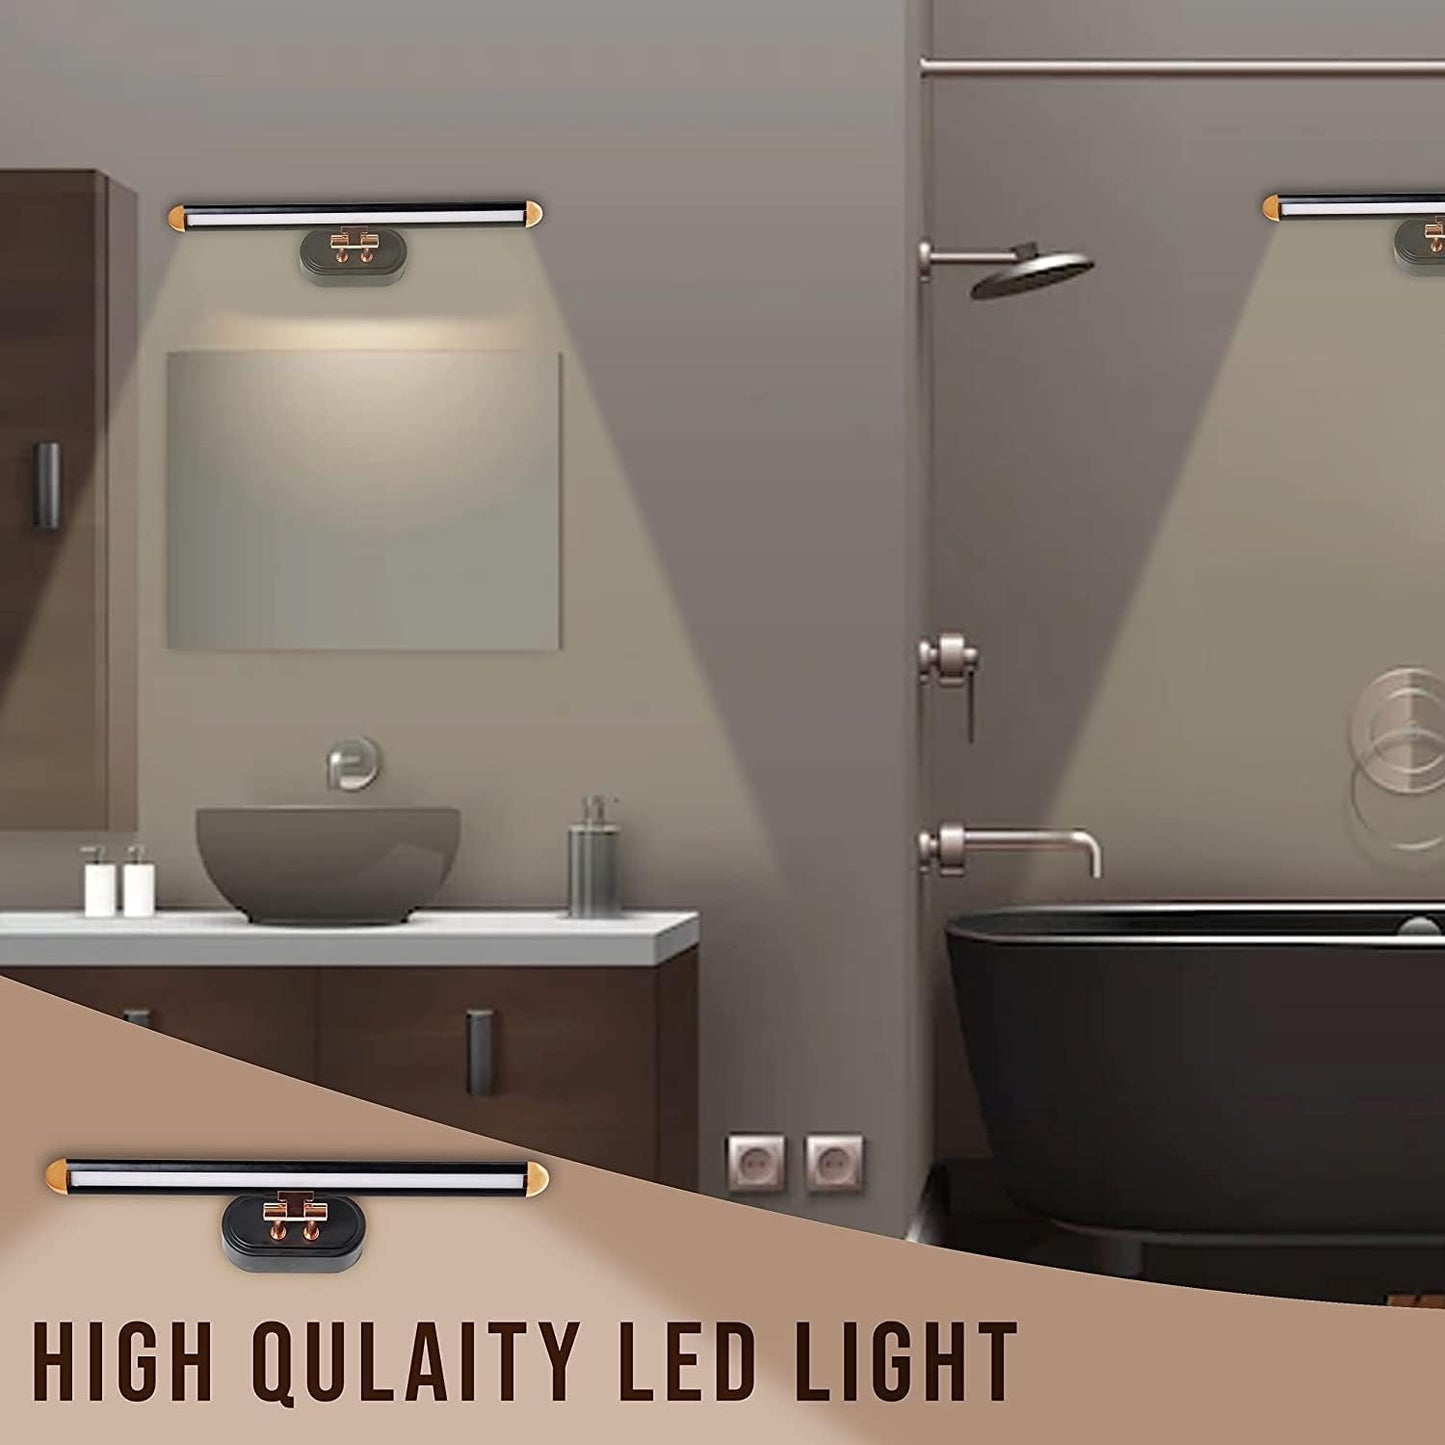 HDC 12W Black Rose Gold Finish Metal Body 3 Step Color Picture Light, Bathroom Vanity Led Mirror Light (Warm White,White,Neutral White) - HDC.IN